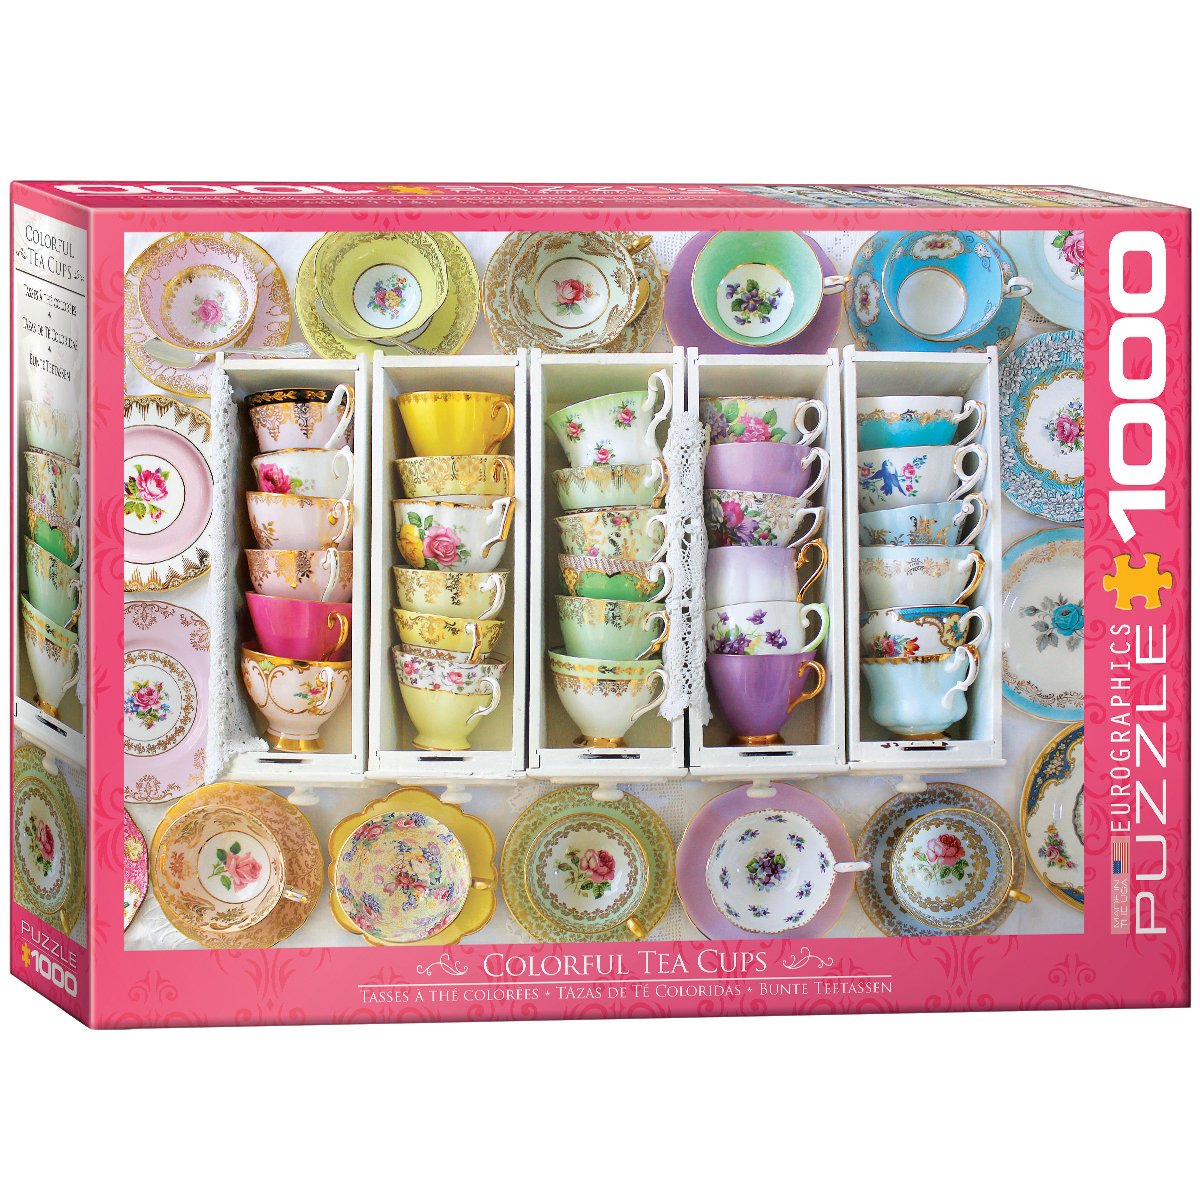 Eurographics - Tea Cups Boxes - 1000 Piece Jigsaw Puzzle